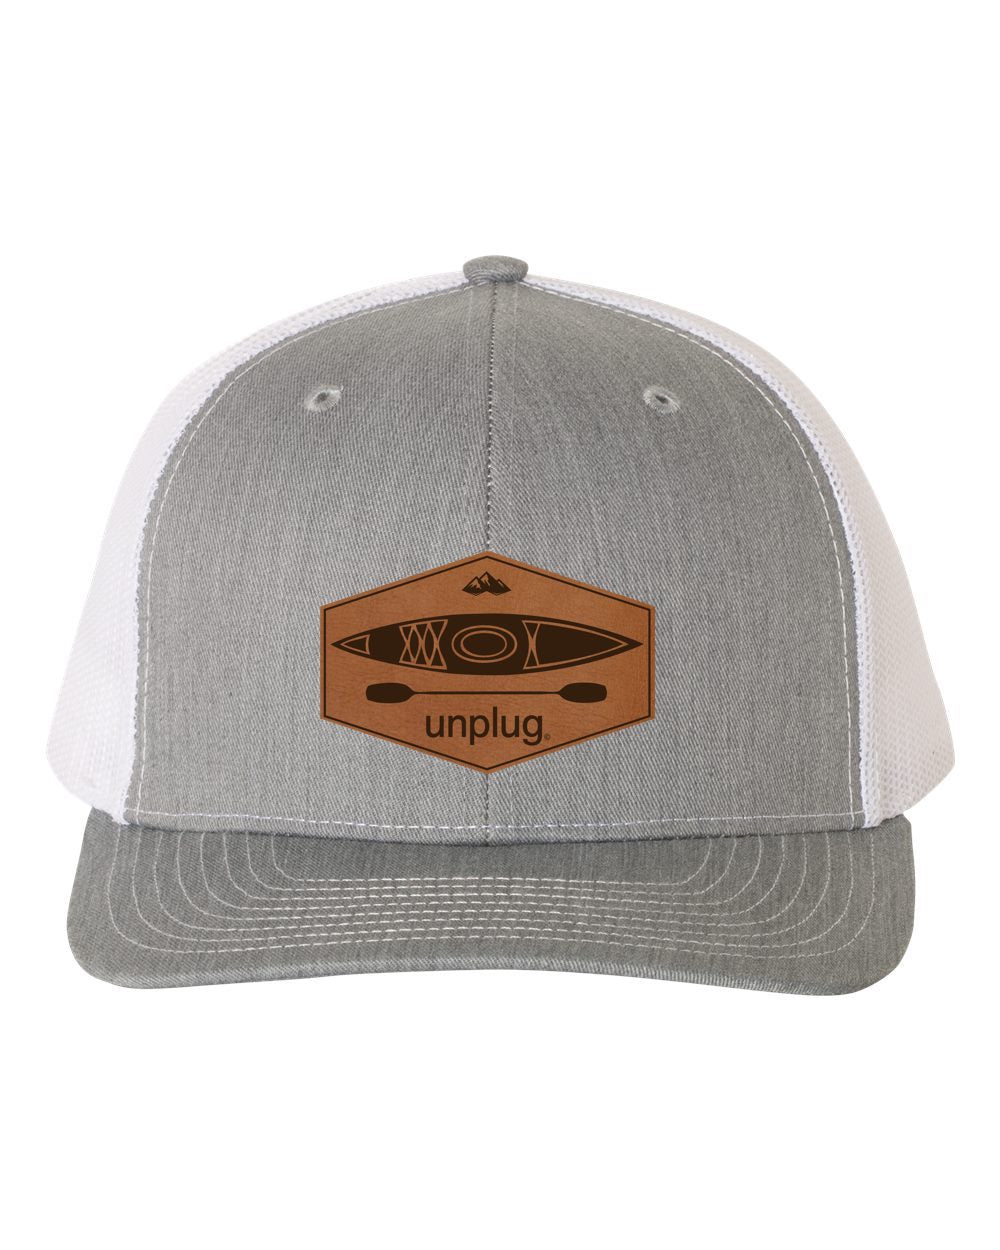 Kayak Leather Patch Hat - Life Unplugged